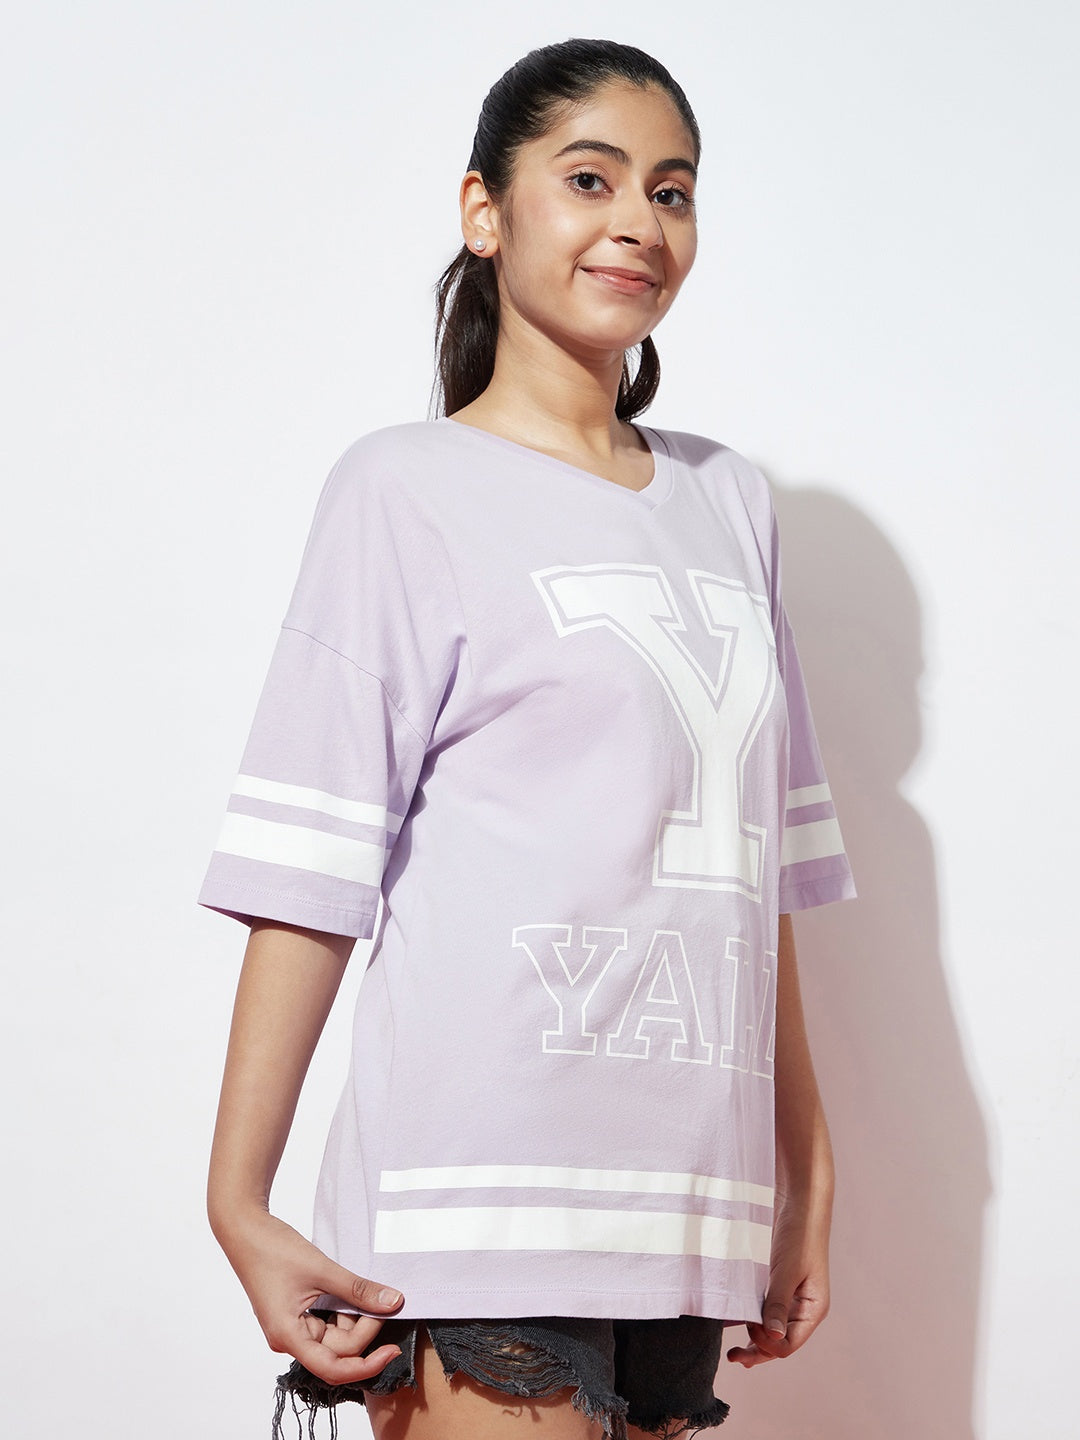 Teen Girls Over Sized Yale T-shirt